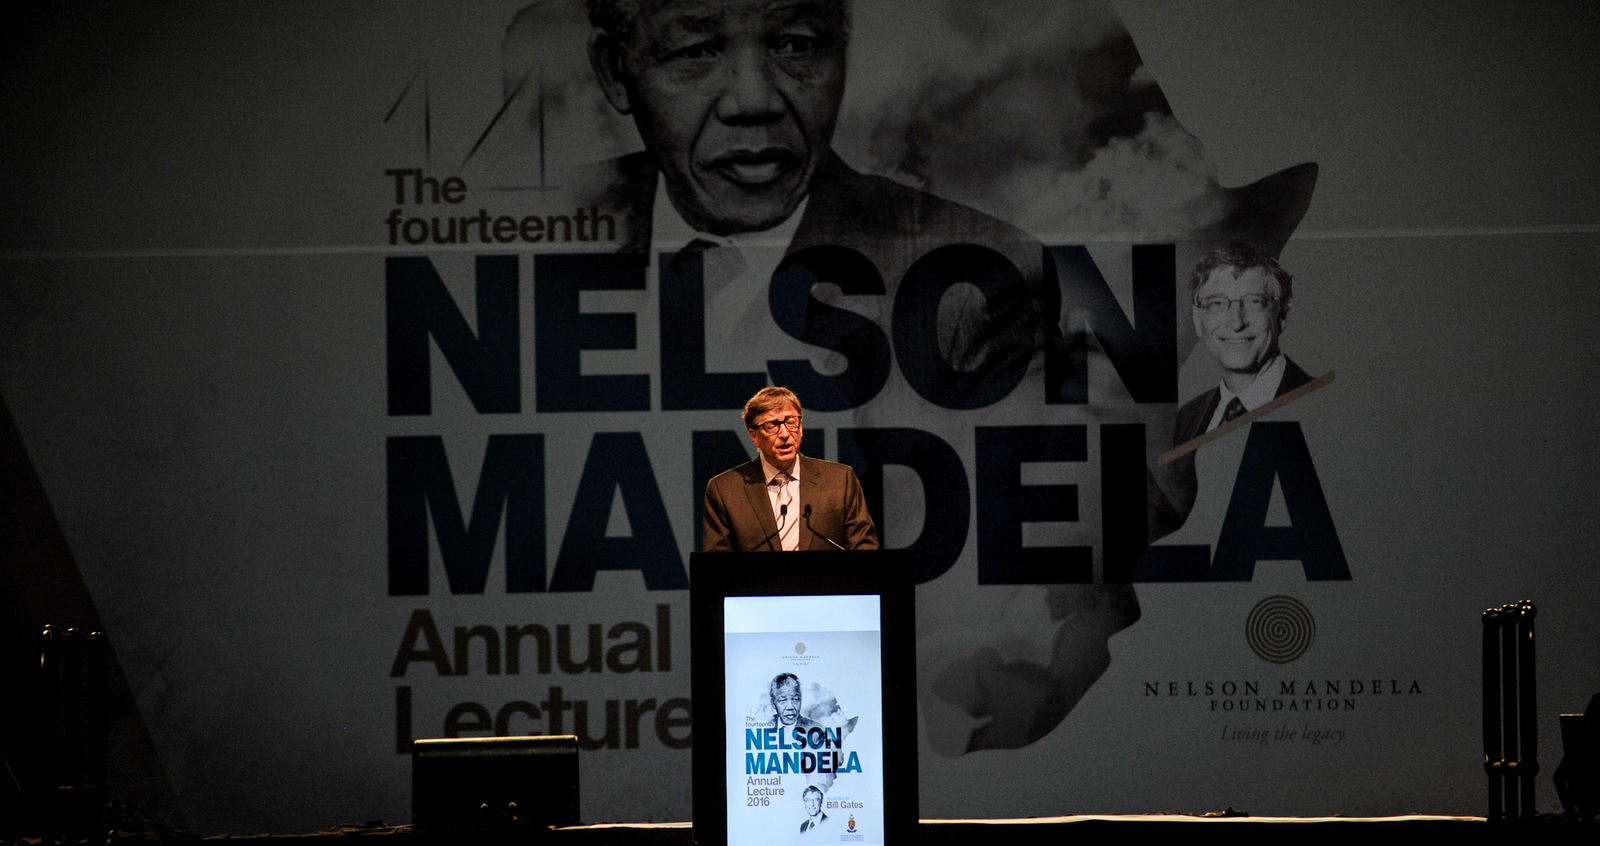 Microsoft co-founder and philanthropist Bill Gates delivers the Nelson Mandela Annual Lecture in Pretoria, South Africa, July 17, 2016 where Gates said that his foundation would invest another $5 billion in Africa over the next five years. (AP Photo)